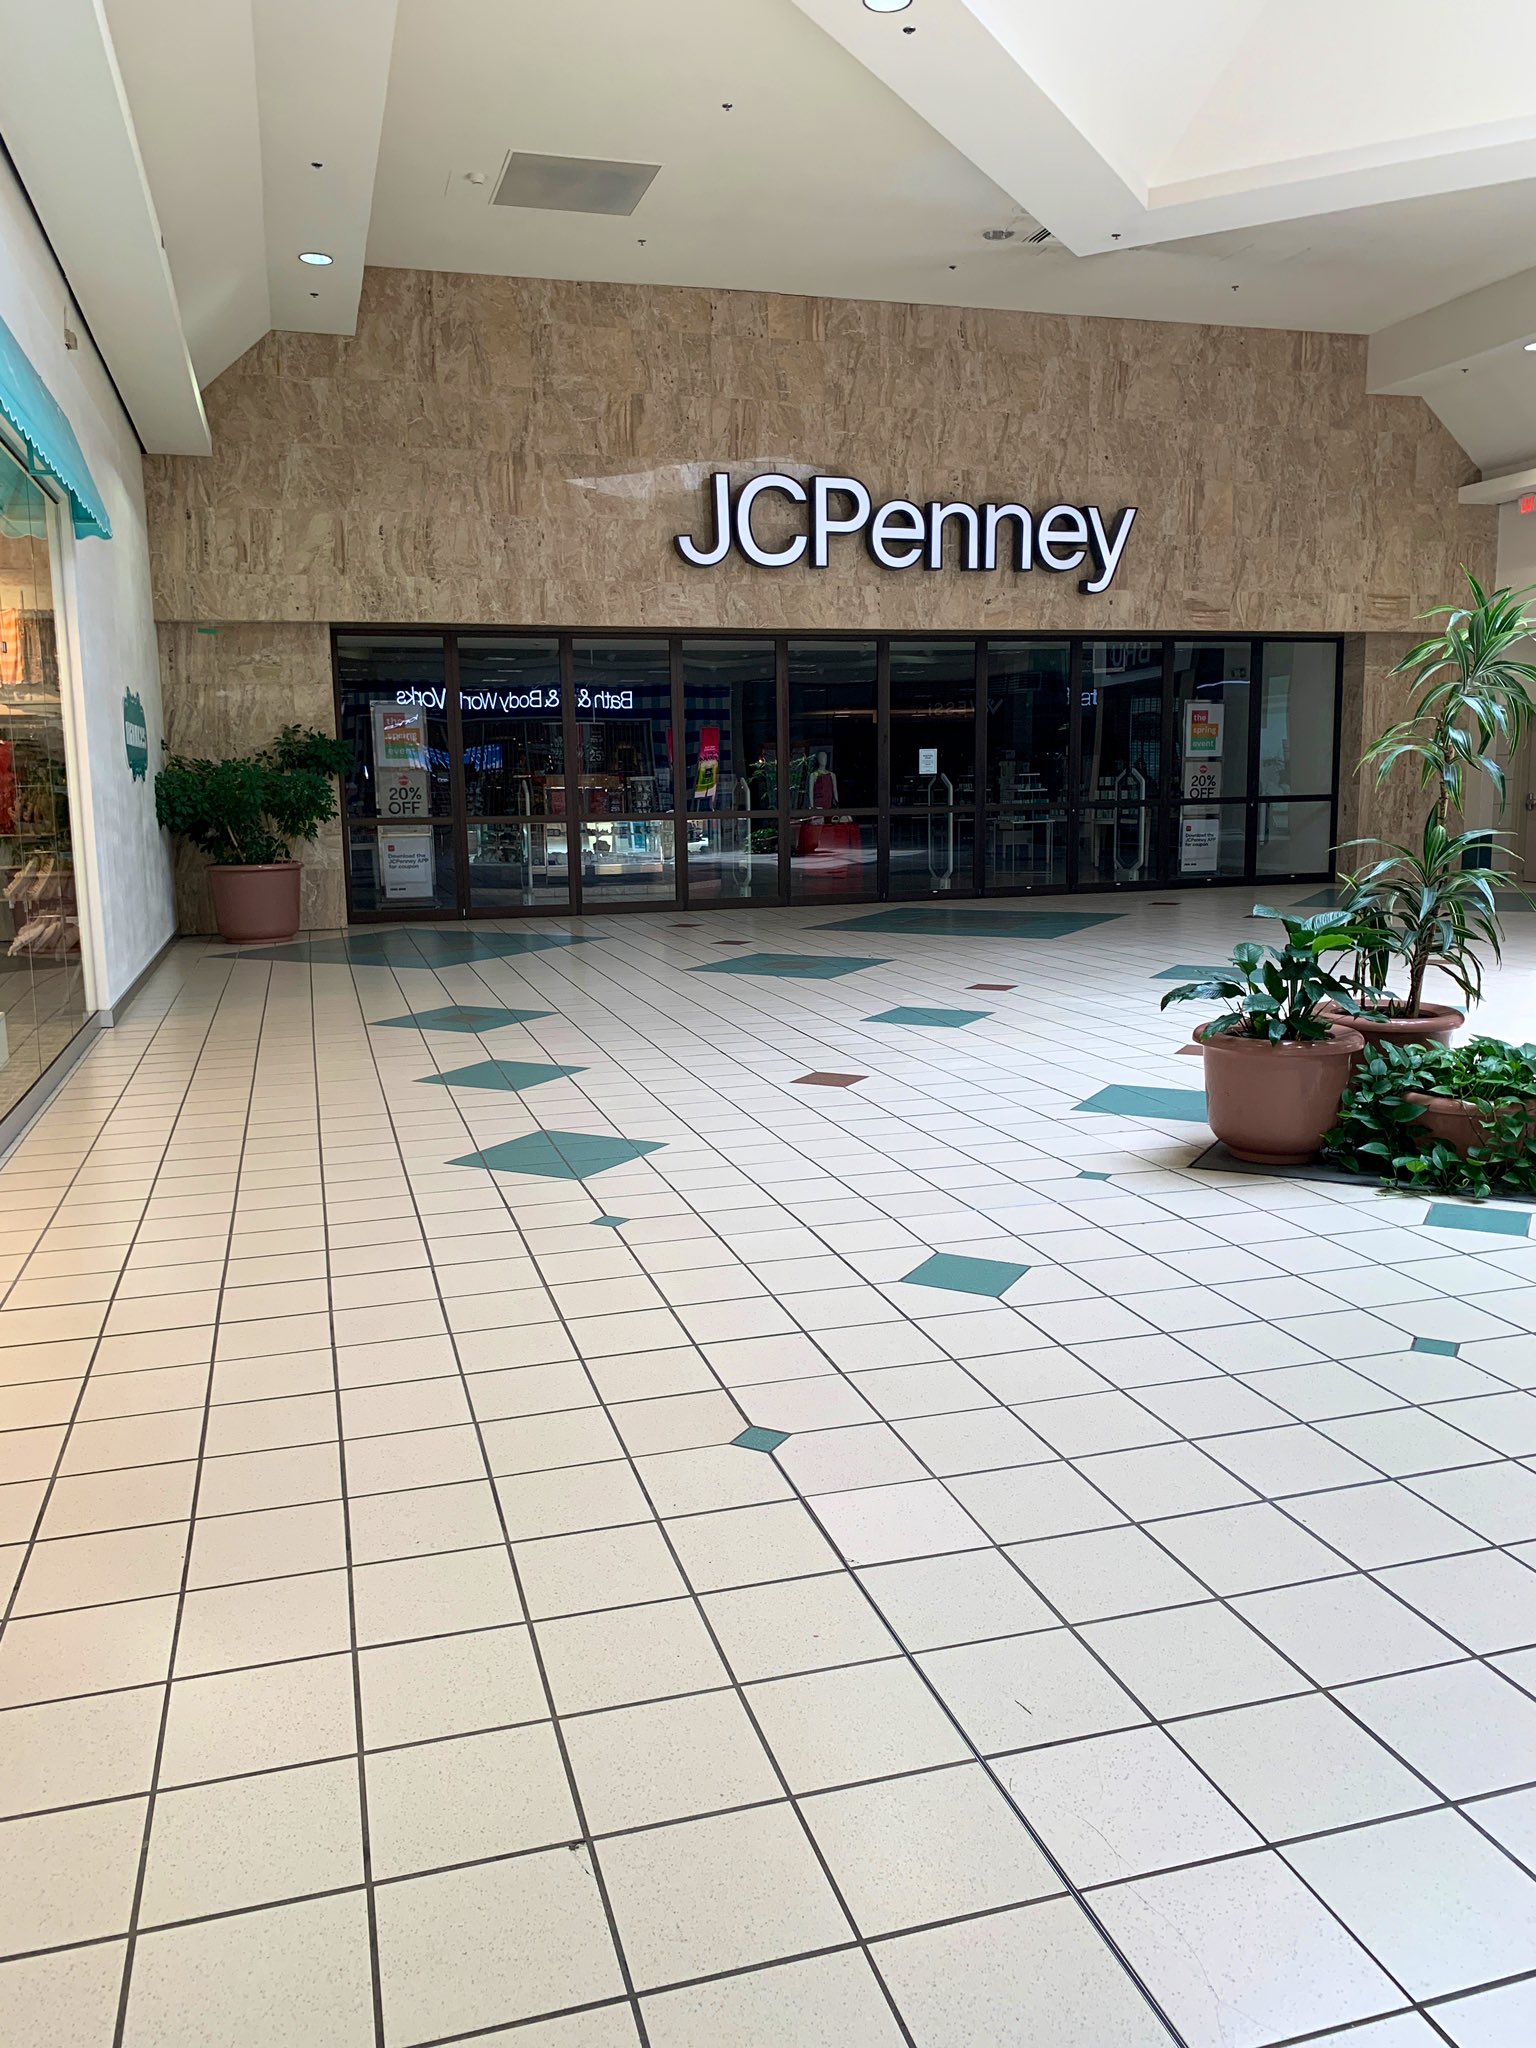 Lauren Thomas on X: Weekly local mall update from mom. JC Penney closed.  Dillard's open. “Just me and a few others,” in the mall, she said.   / X